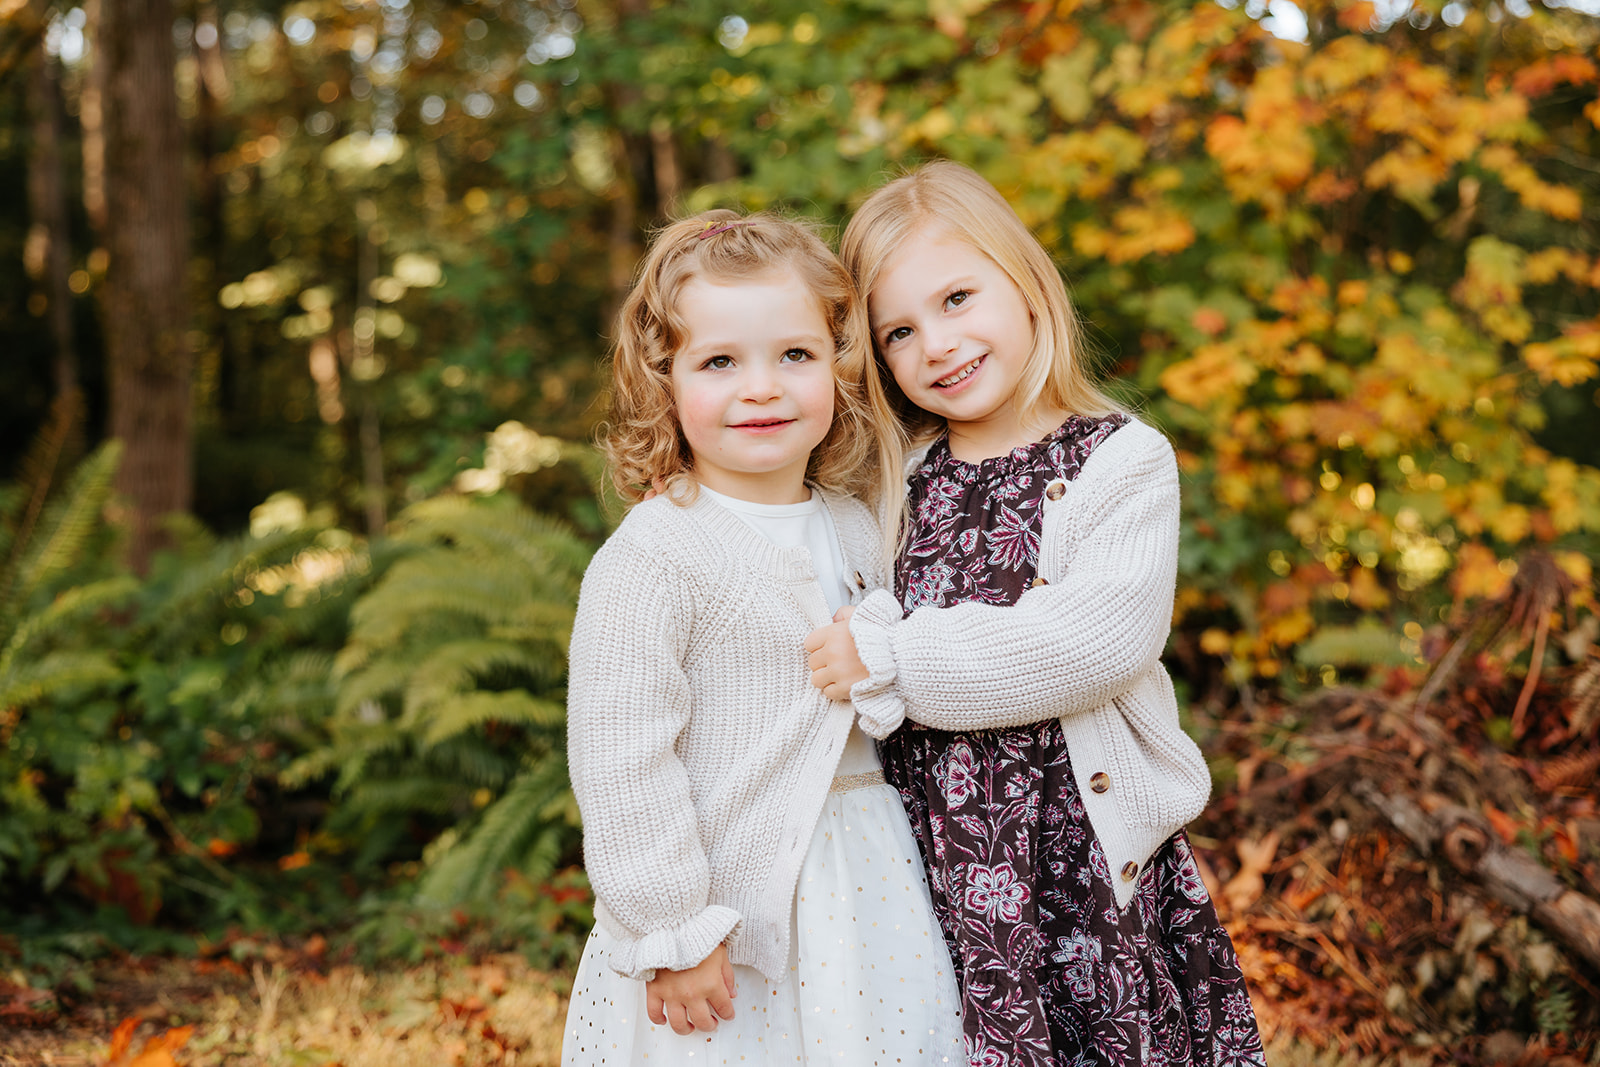 A close-up photo of two young girls hugging each other and smiling at the camera in front of colorful fall foliage.